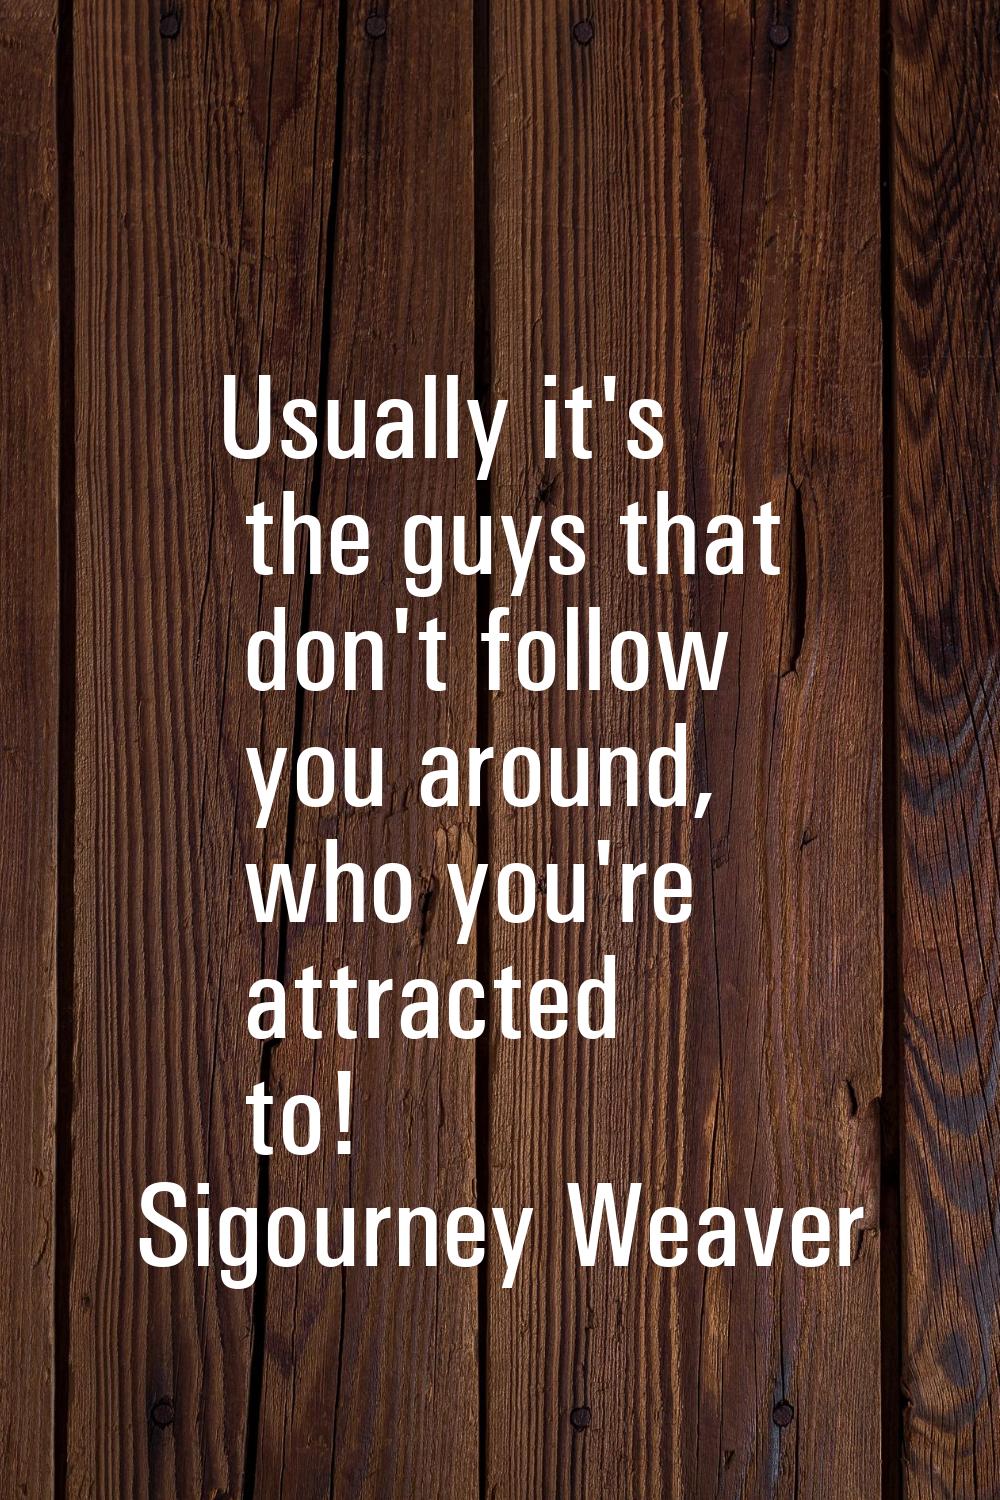 Usually it's the guys that don't follow you around, who you're attracted to!